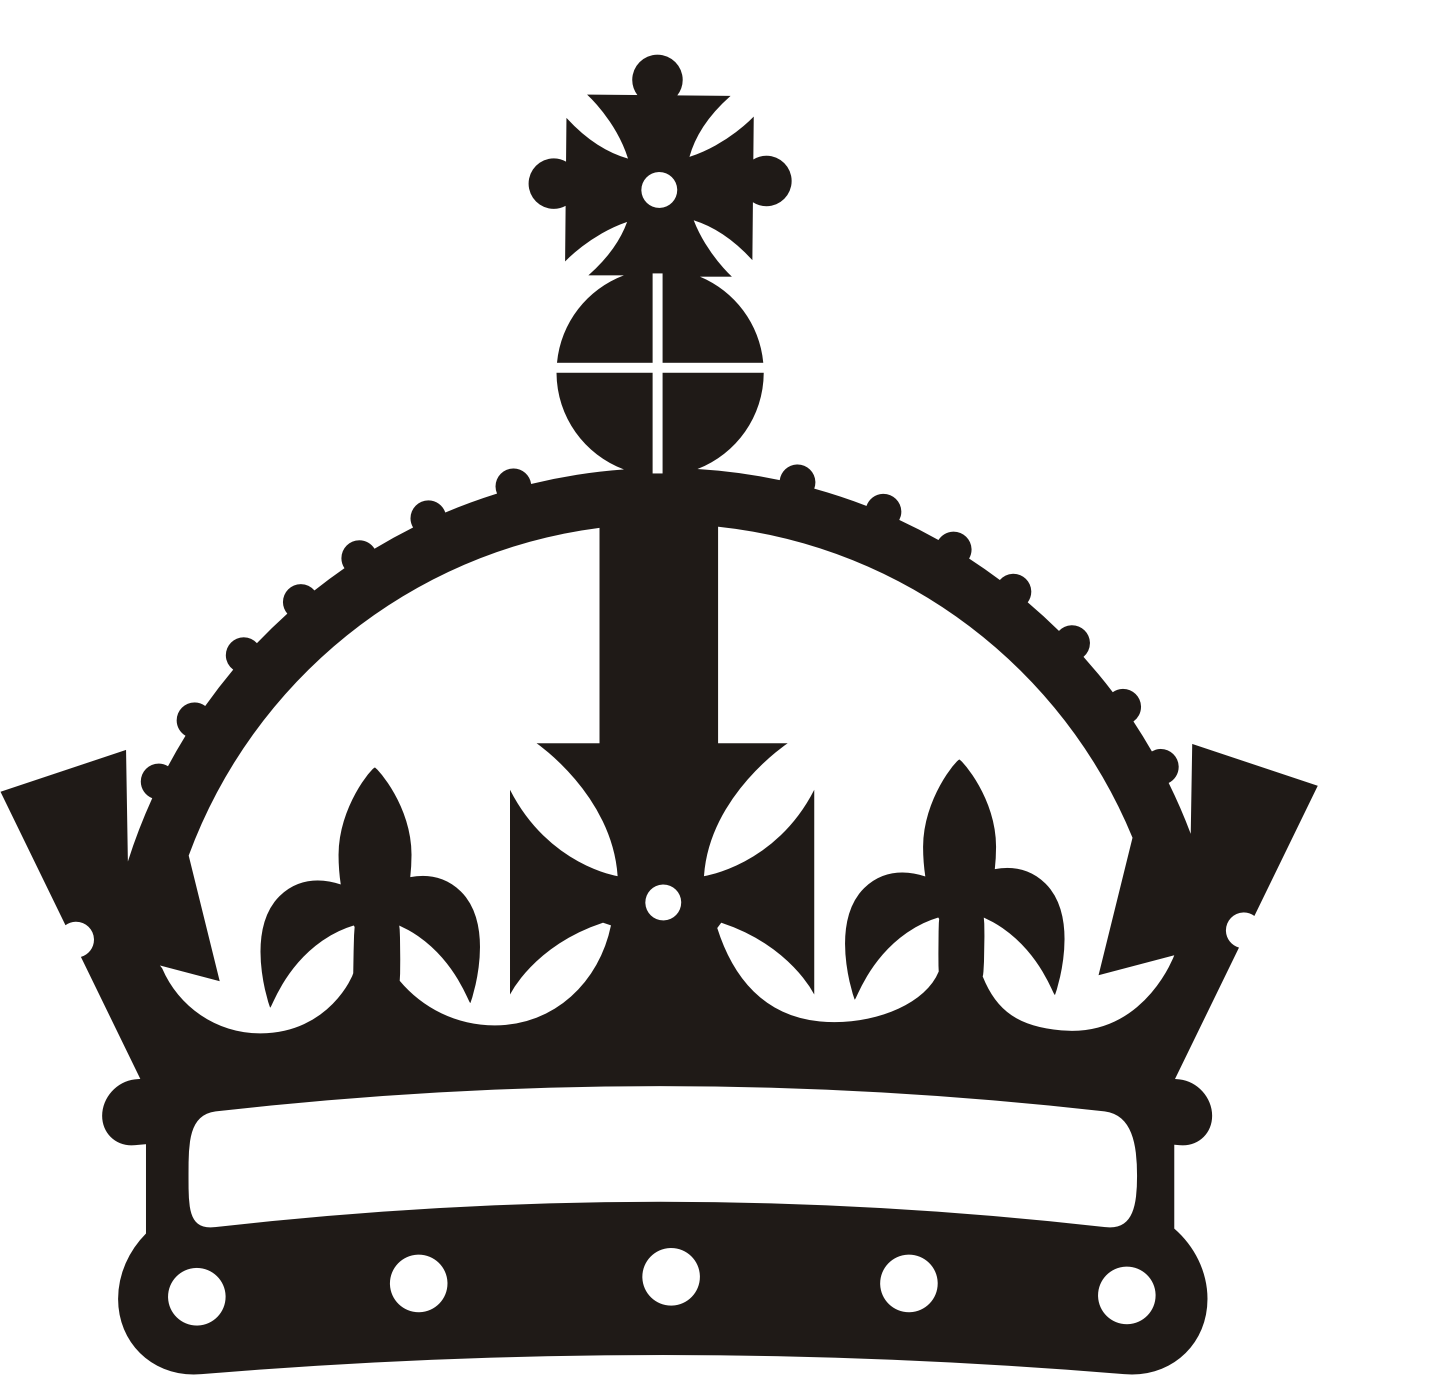 King And Queen Crown Clip Art | Clipart Panda - Free Clipart Images